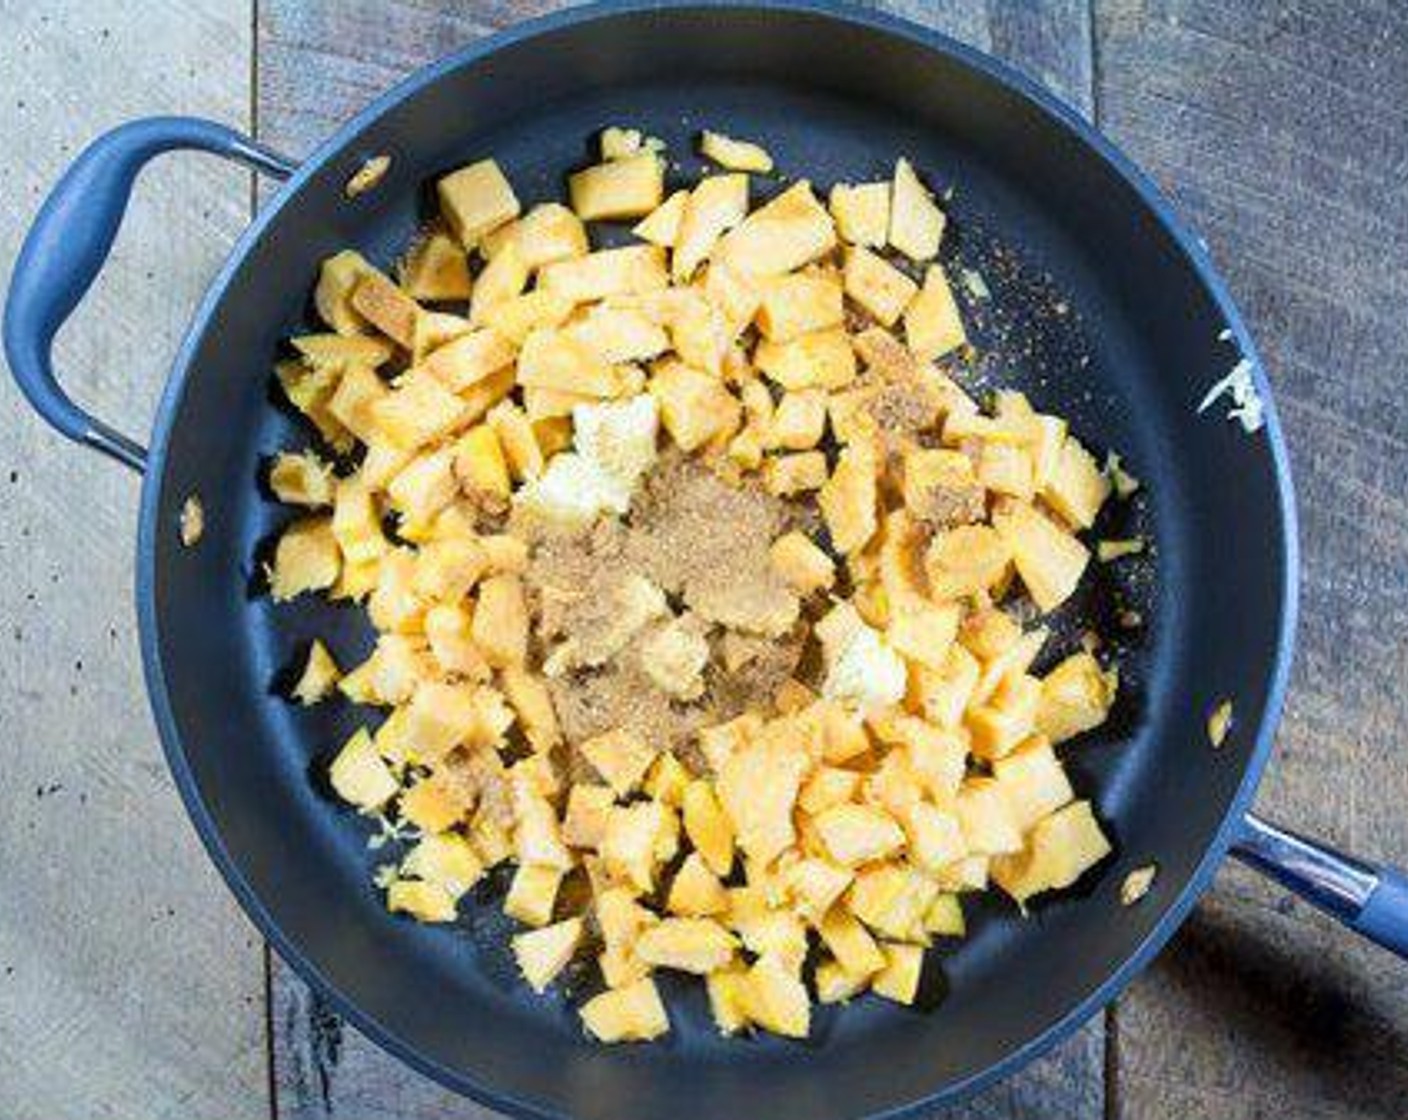 step 5 Melt Unsalted Butter (2 Tbsp) in a large skillet over medium-high heat. Add Coconut Sugar (2 Tbsp) and Acorn Squash (2 cups) then saute, stirring every so often under the squash is tender and caramelized for about 15 minutes.